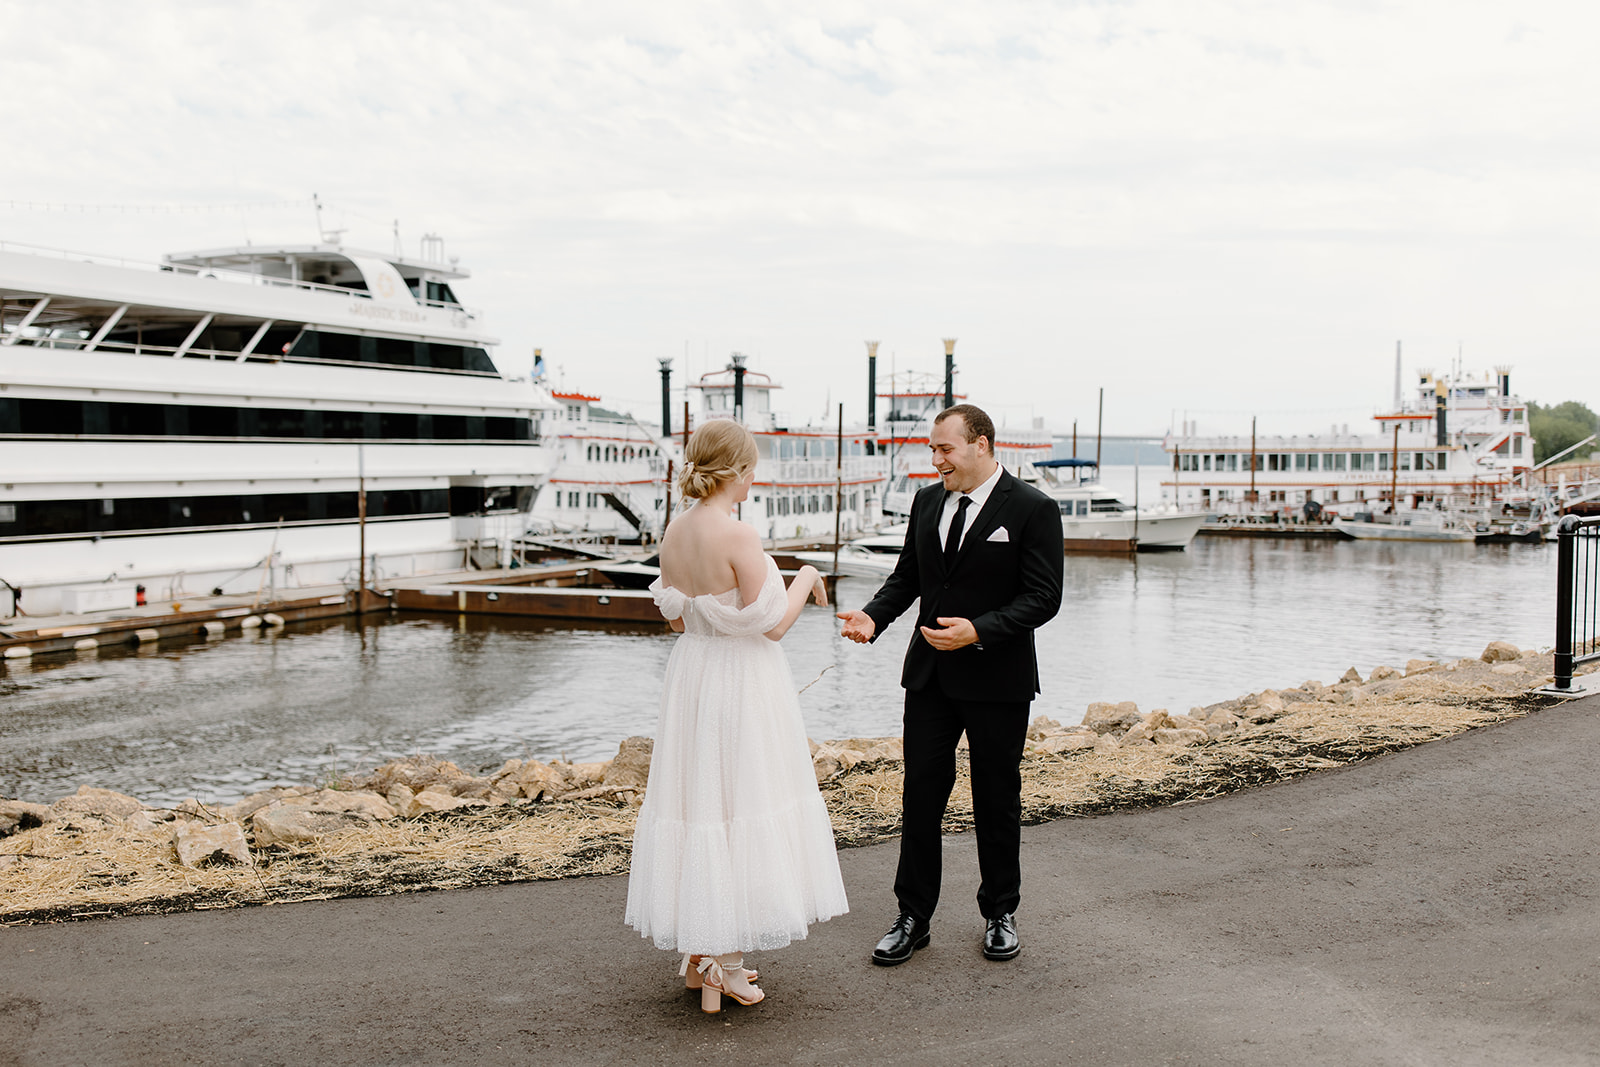 Bride and groom see each other for the first time on their wedding day in front of a yacht